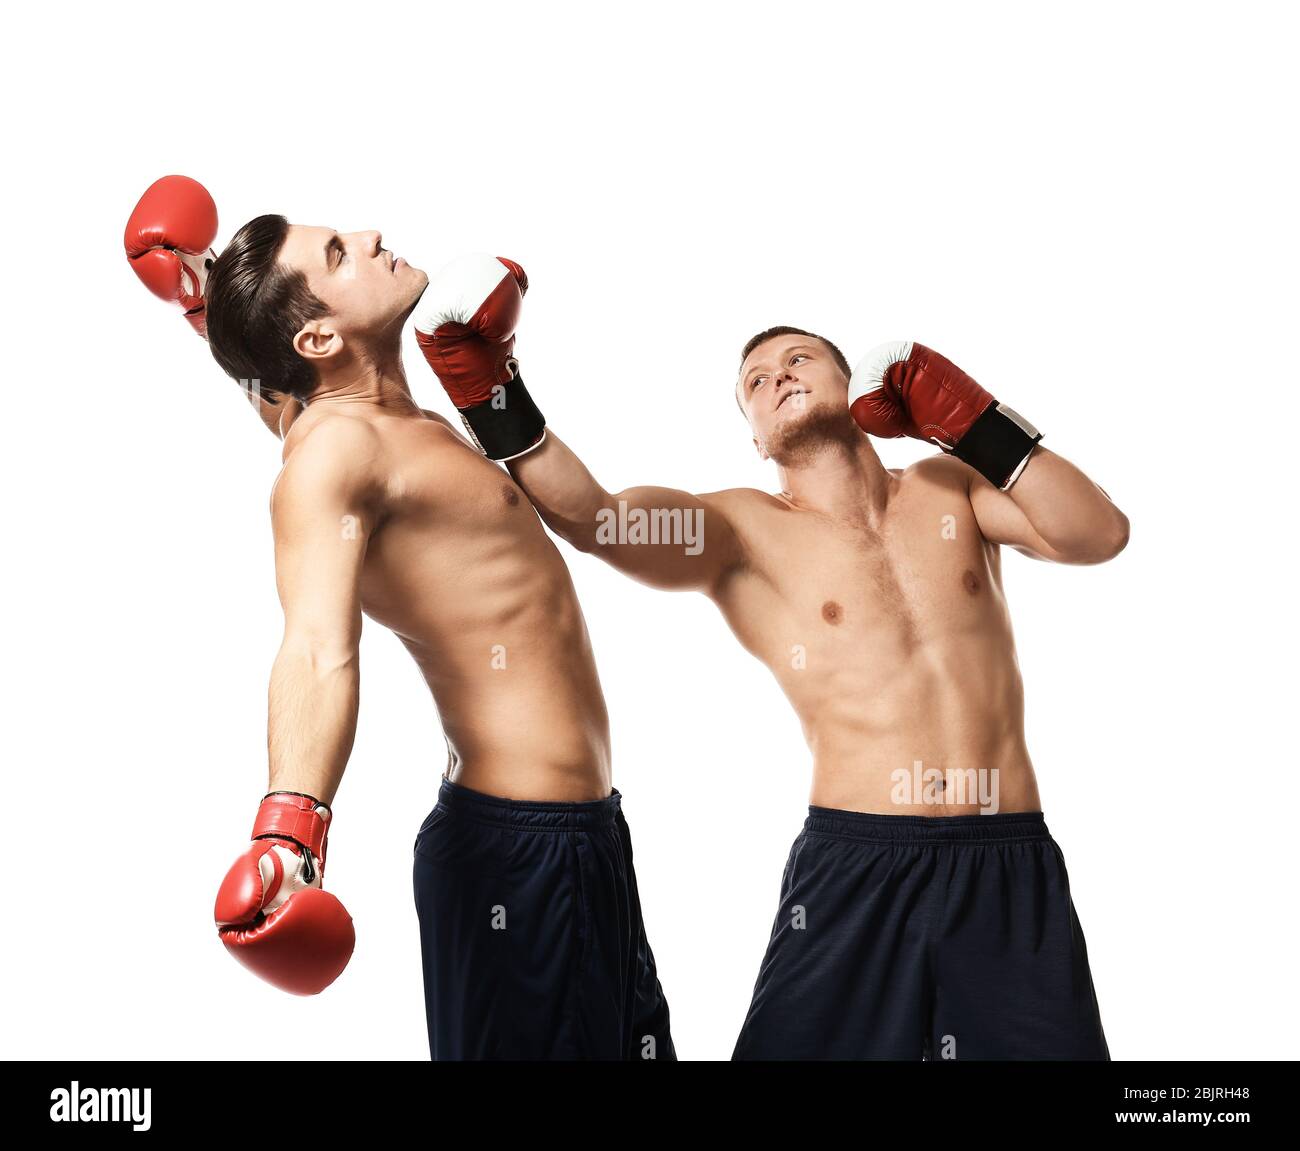 Attractive young boxers fighting on white background Stock Photo - Alamy